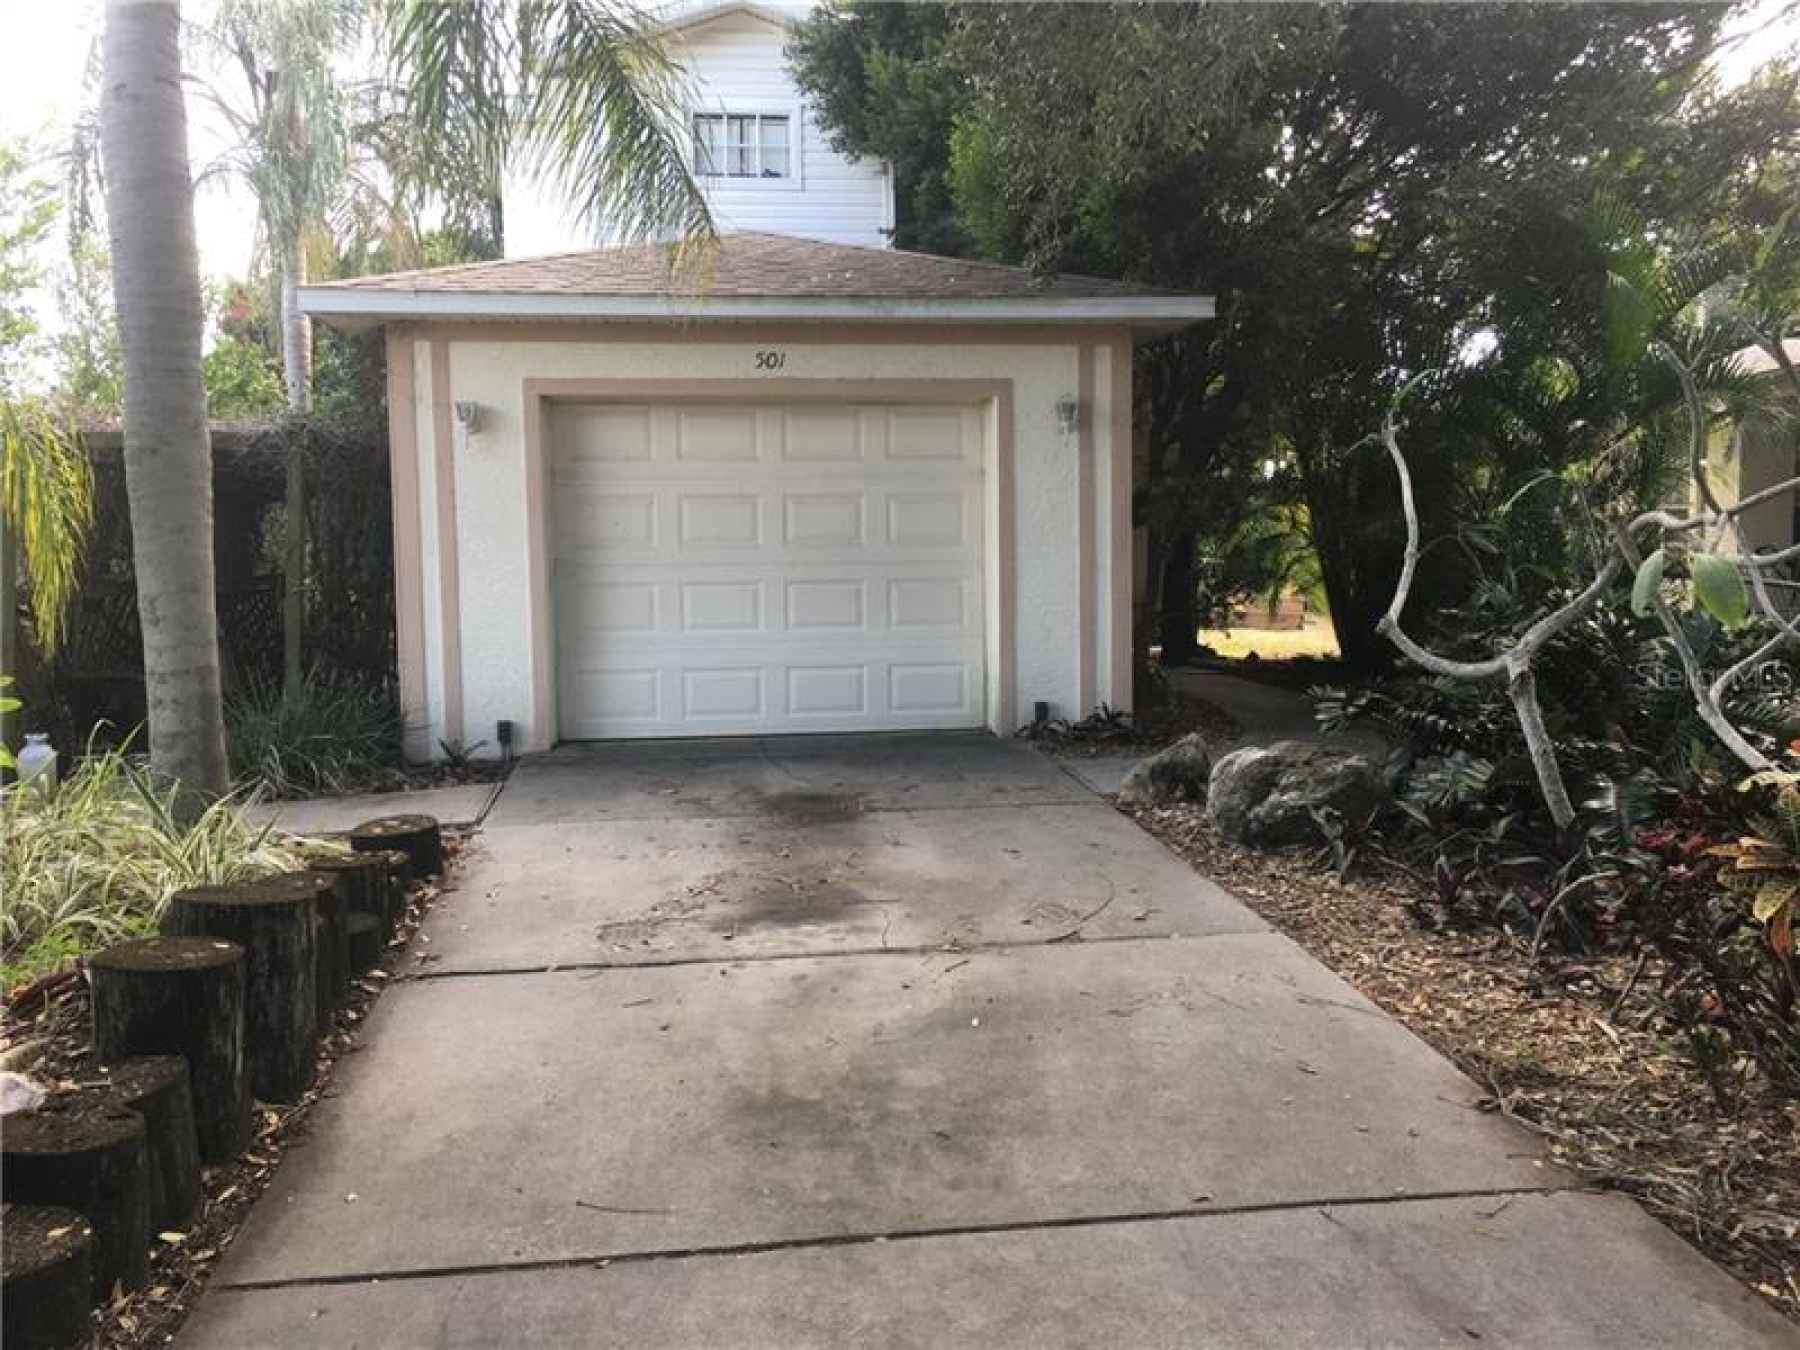 Path to right of garage leads to front door.